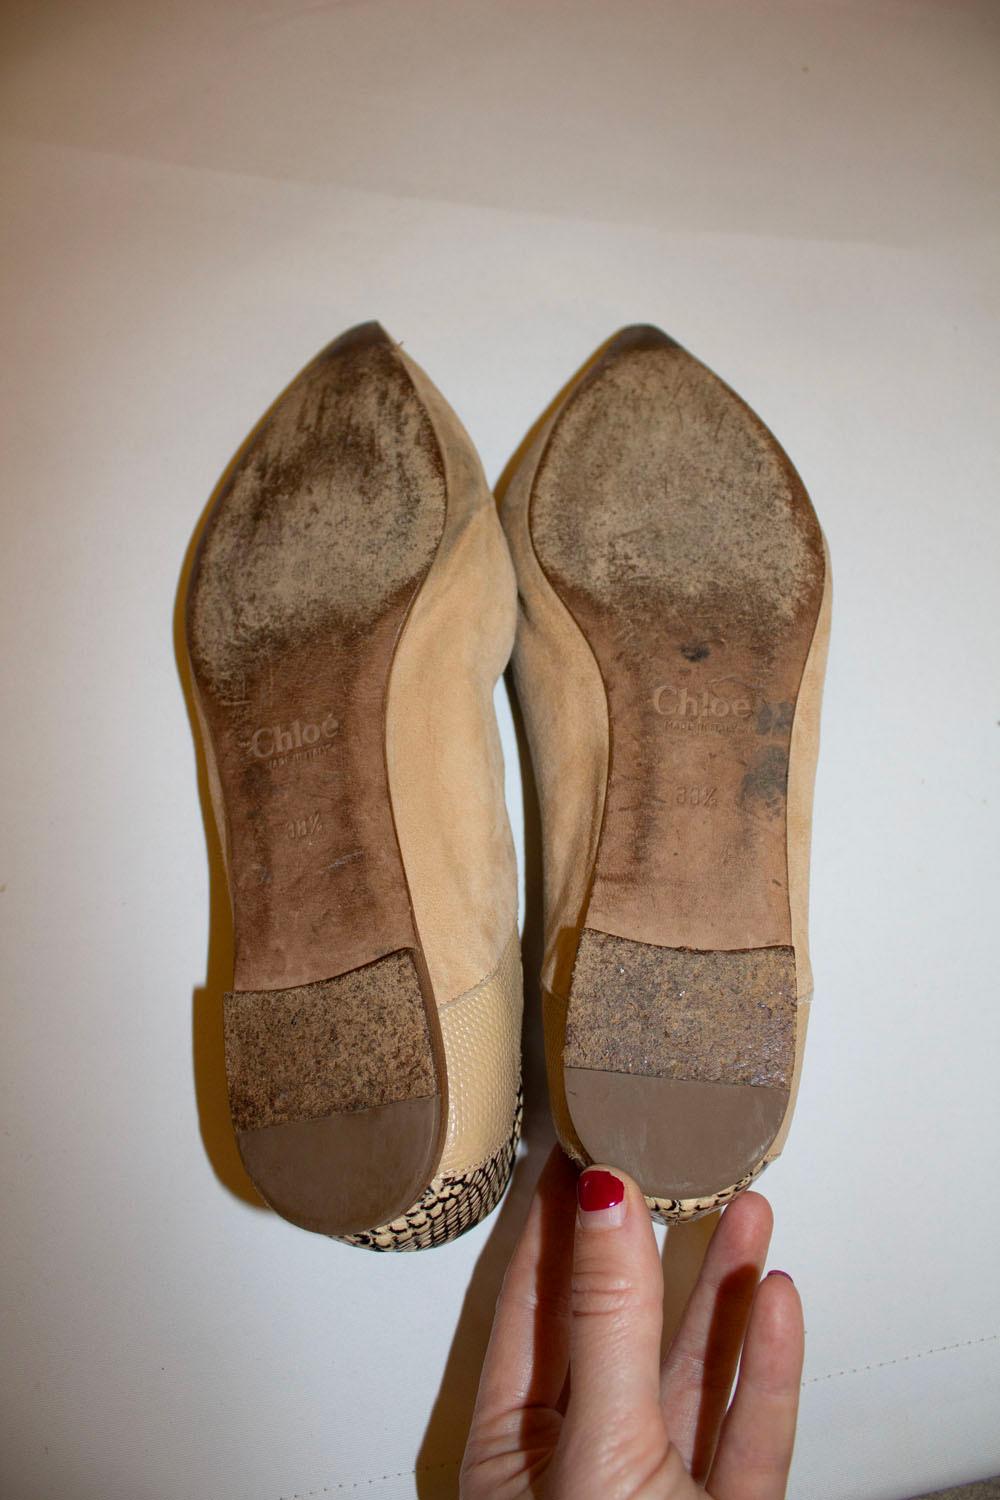 Chloe Suede and Snakeskin Flats In Good Condition For Sale In London, GB